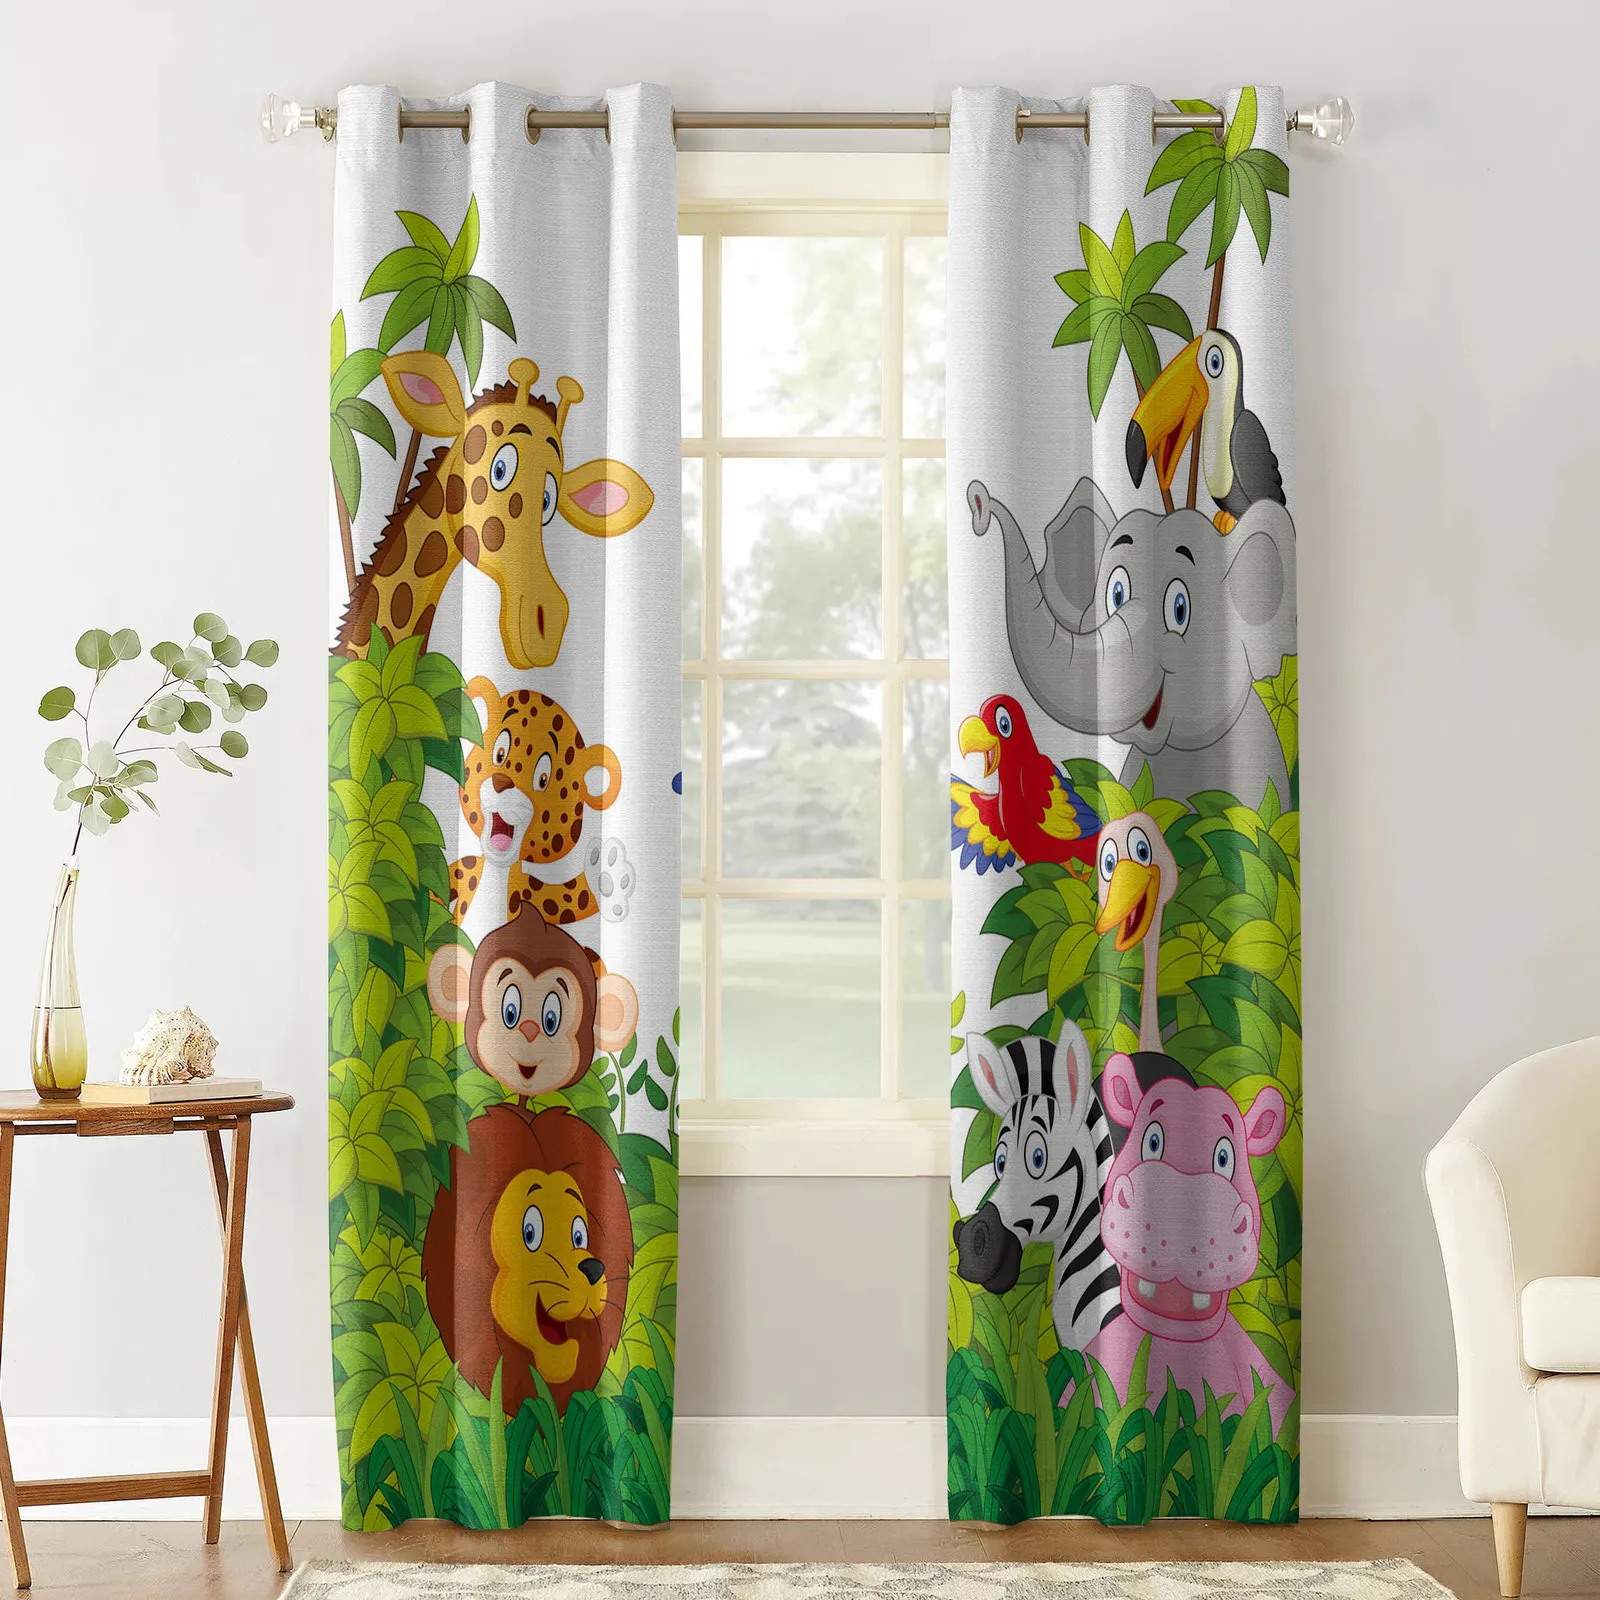 Bedroom Kitchen Curtain Cartoon Zoo Animals Collection Jungle Child Window Curtains Curtains for Living Room Decorative Items LJ20286Q